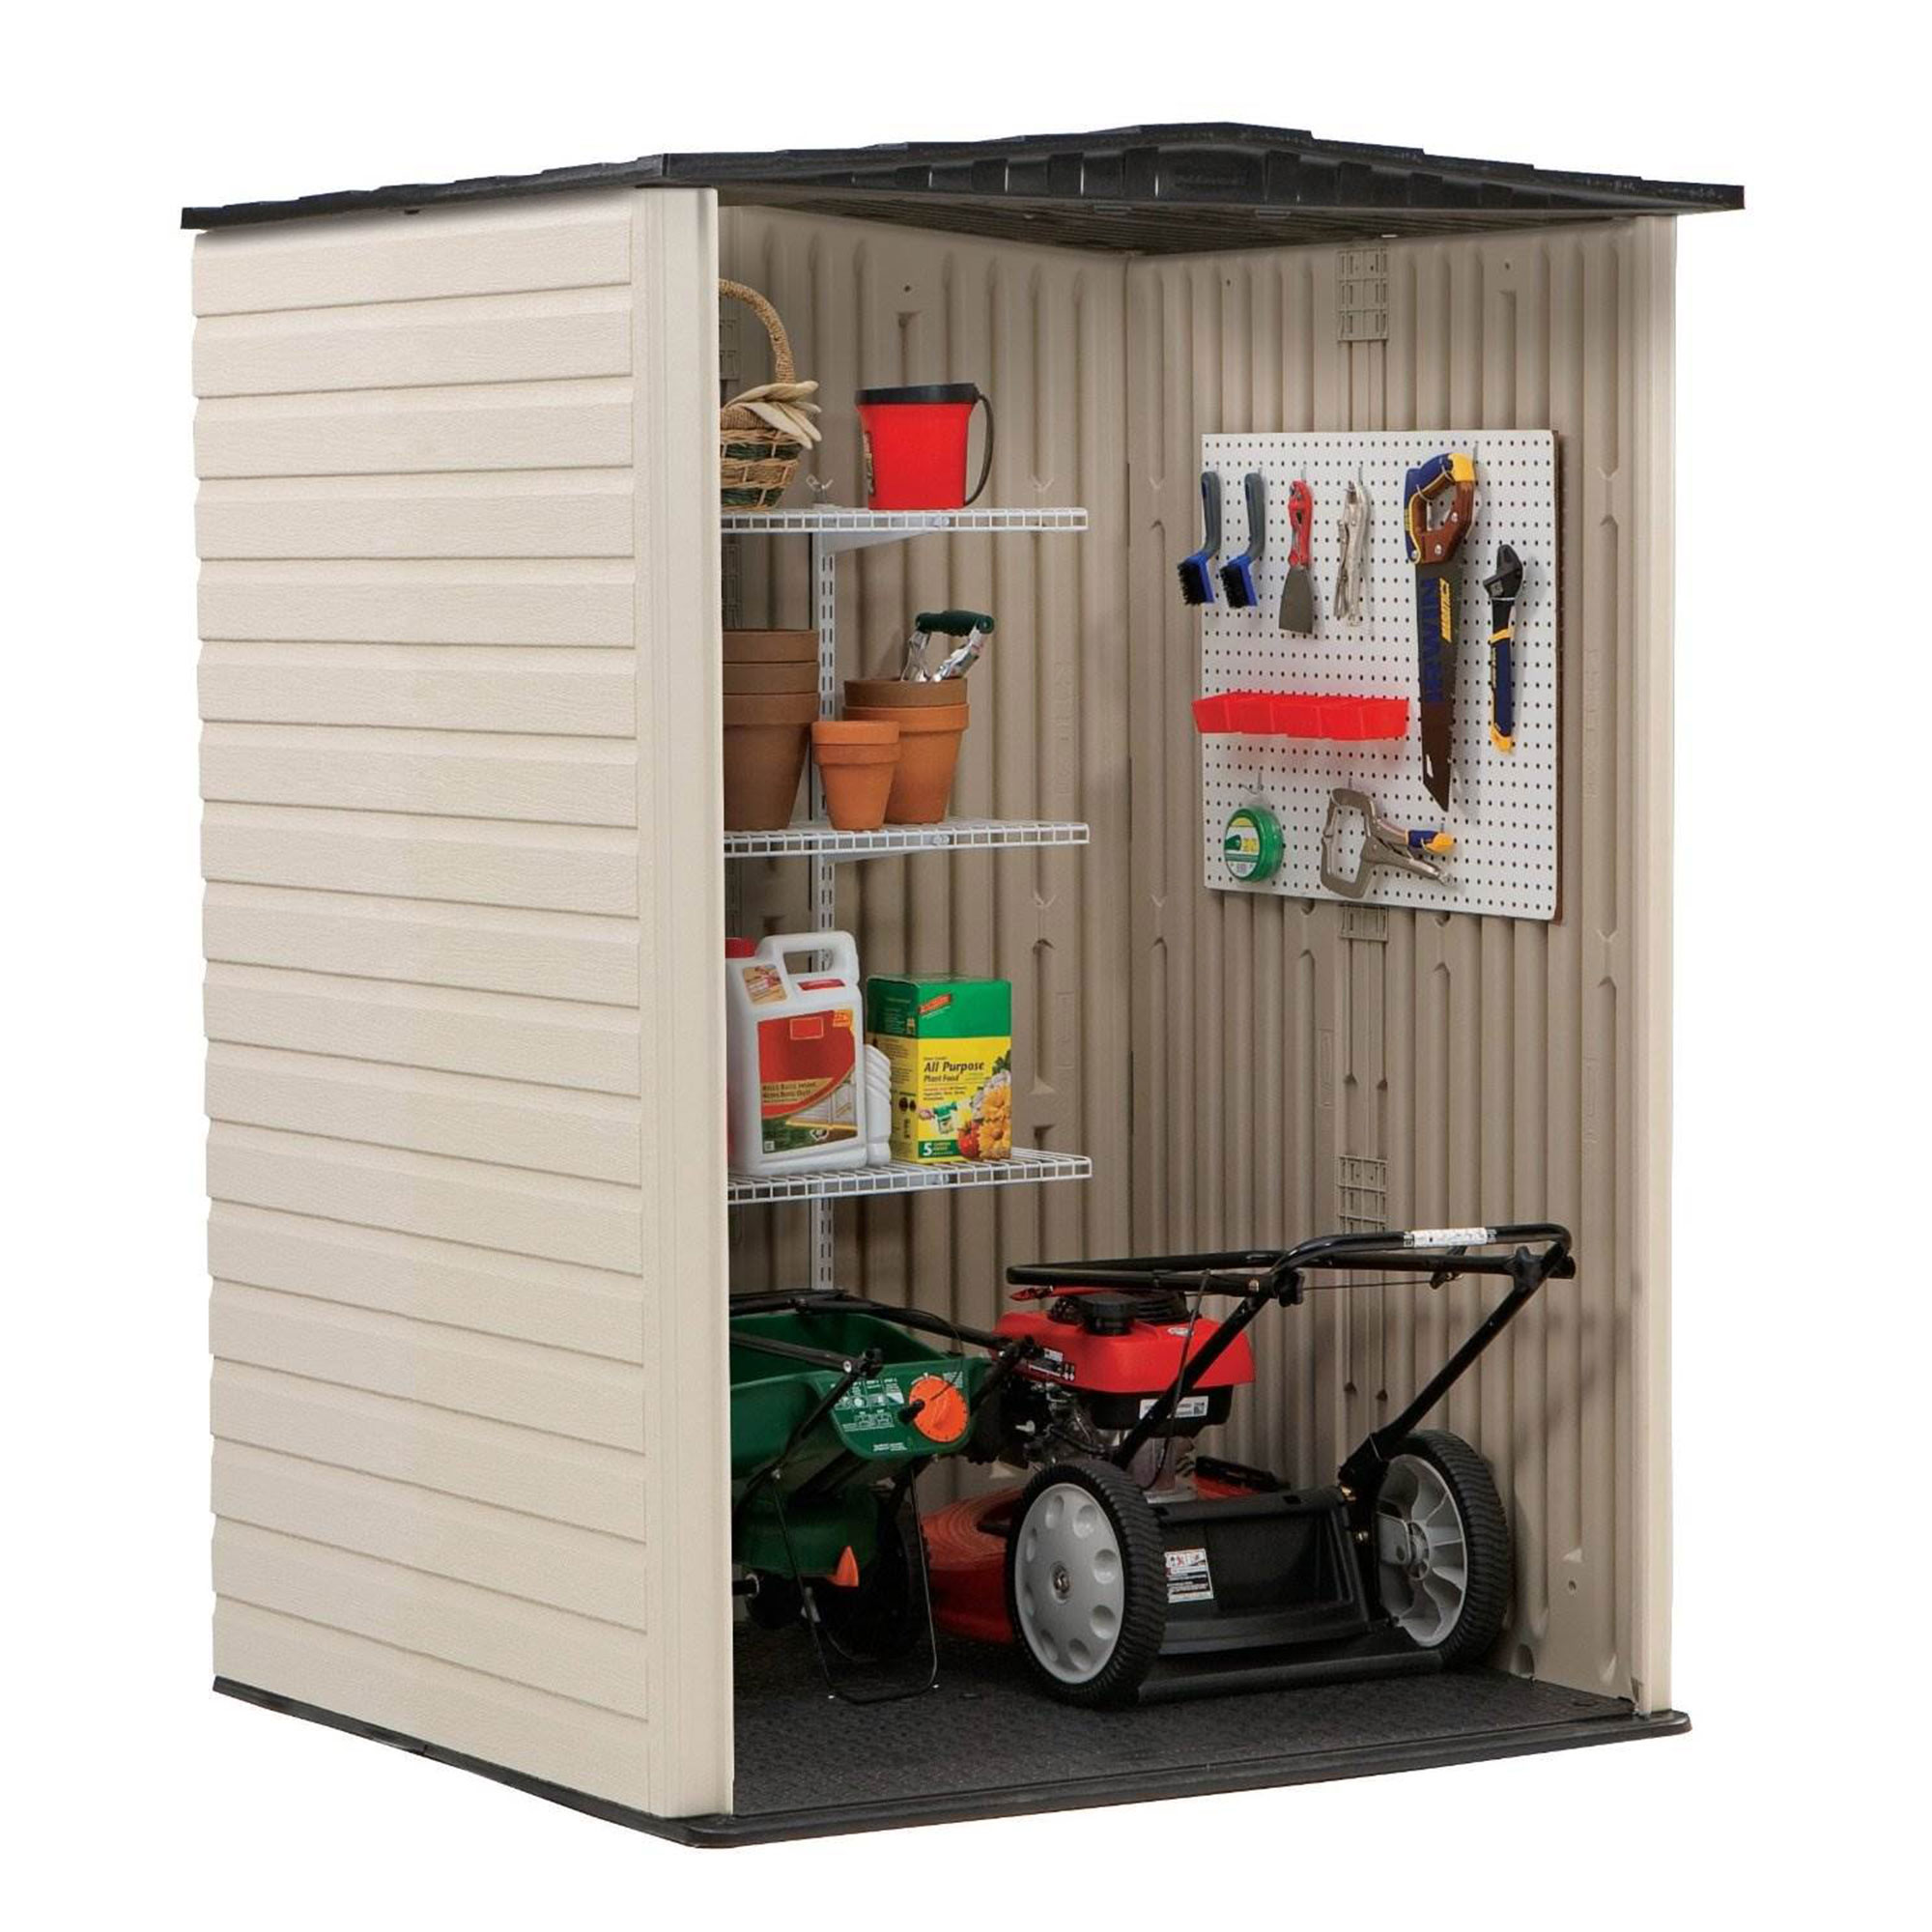 Rubbermaid Outdoor Medium Vertical Storage Shed, Resin, Beige, 72" H x 53.2" W x  57" L - image 2 of 4